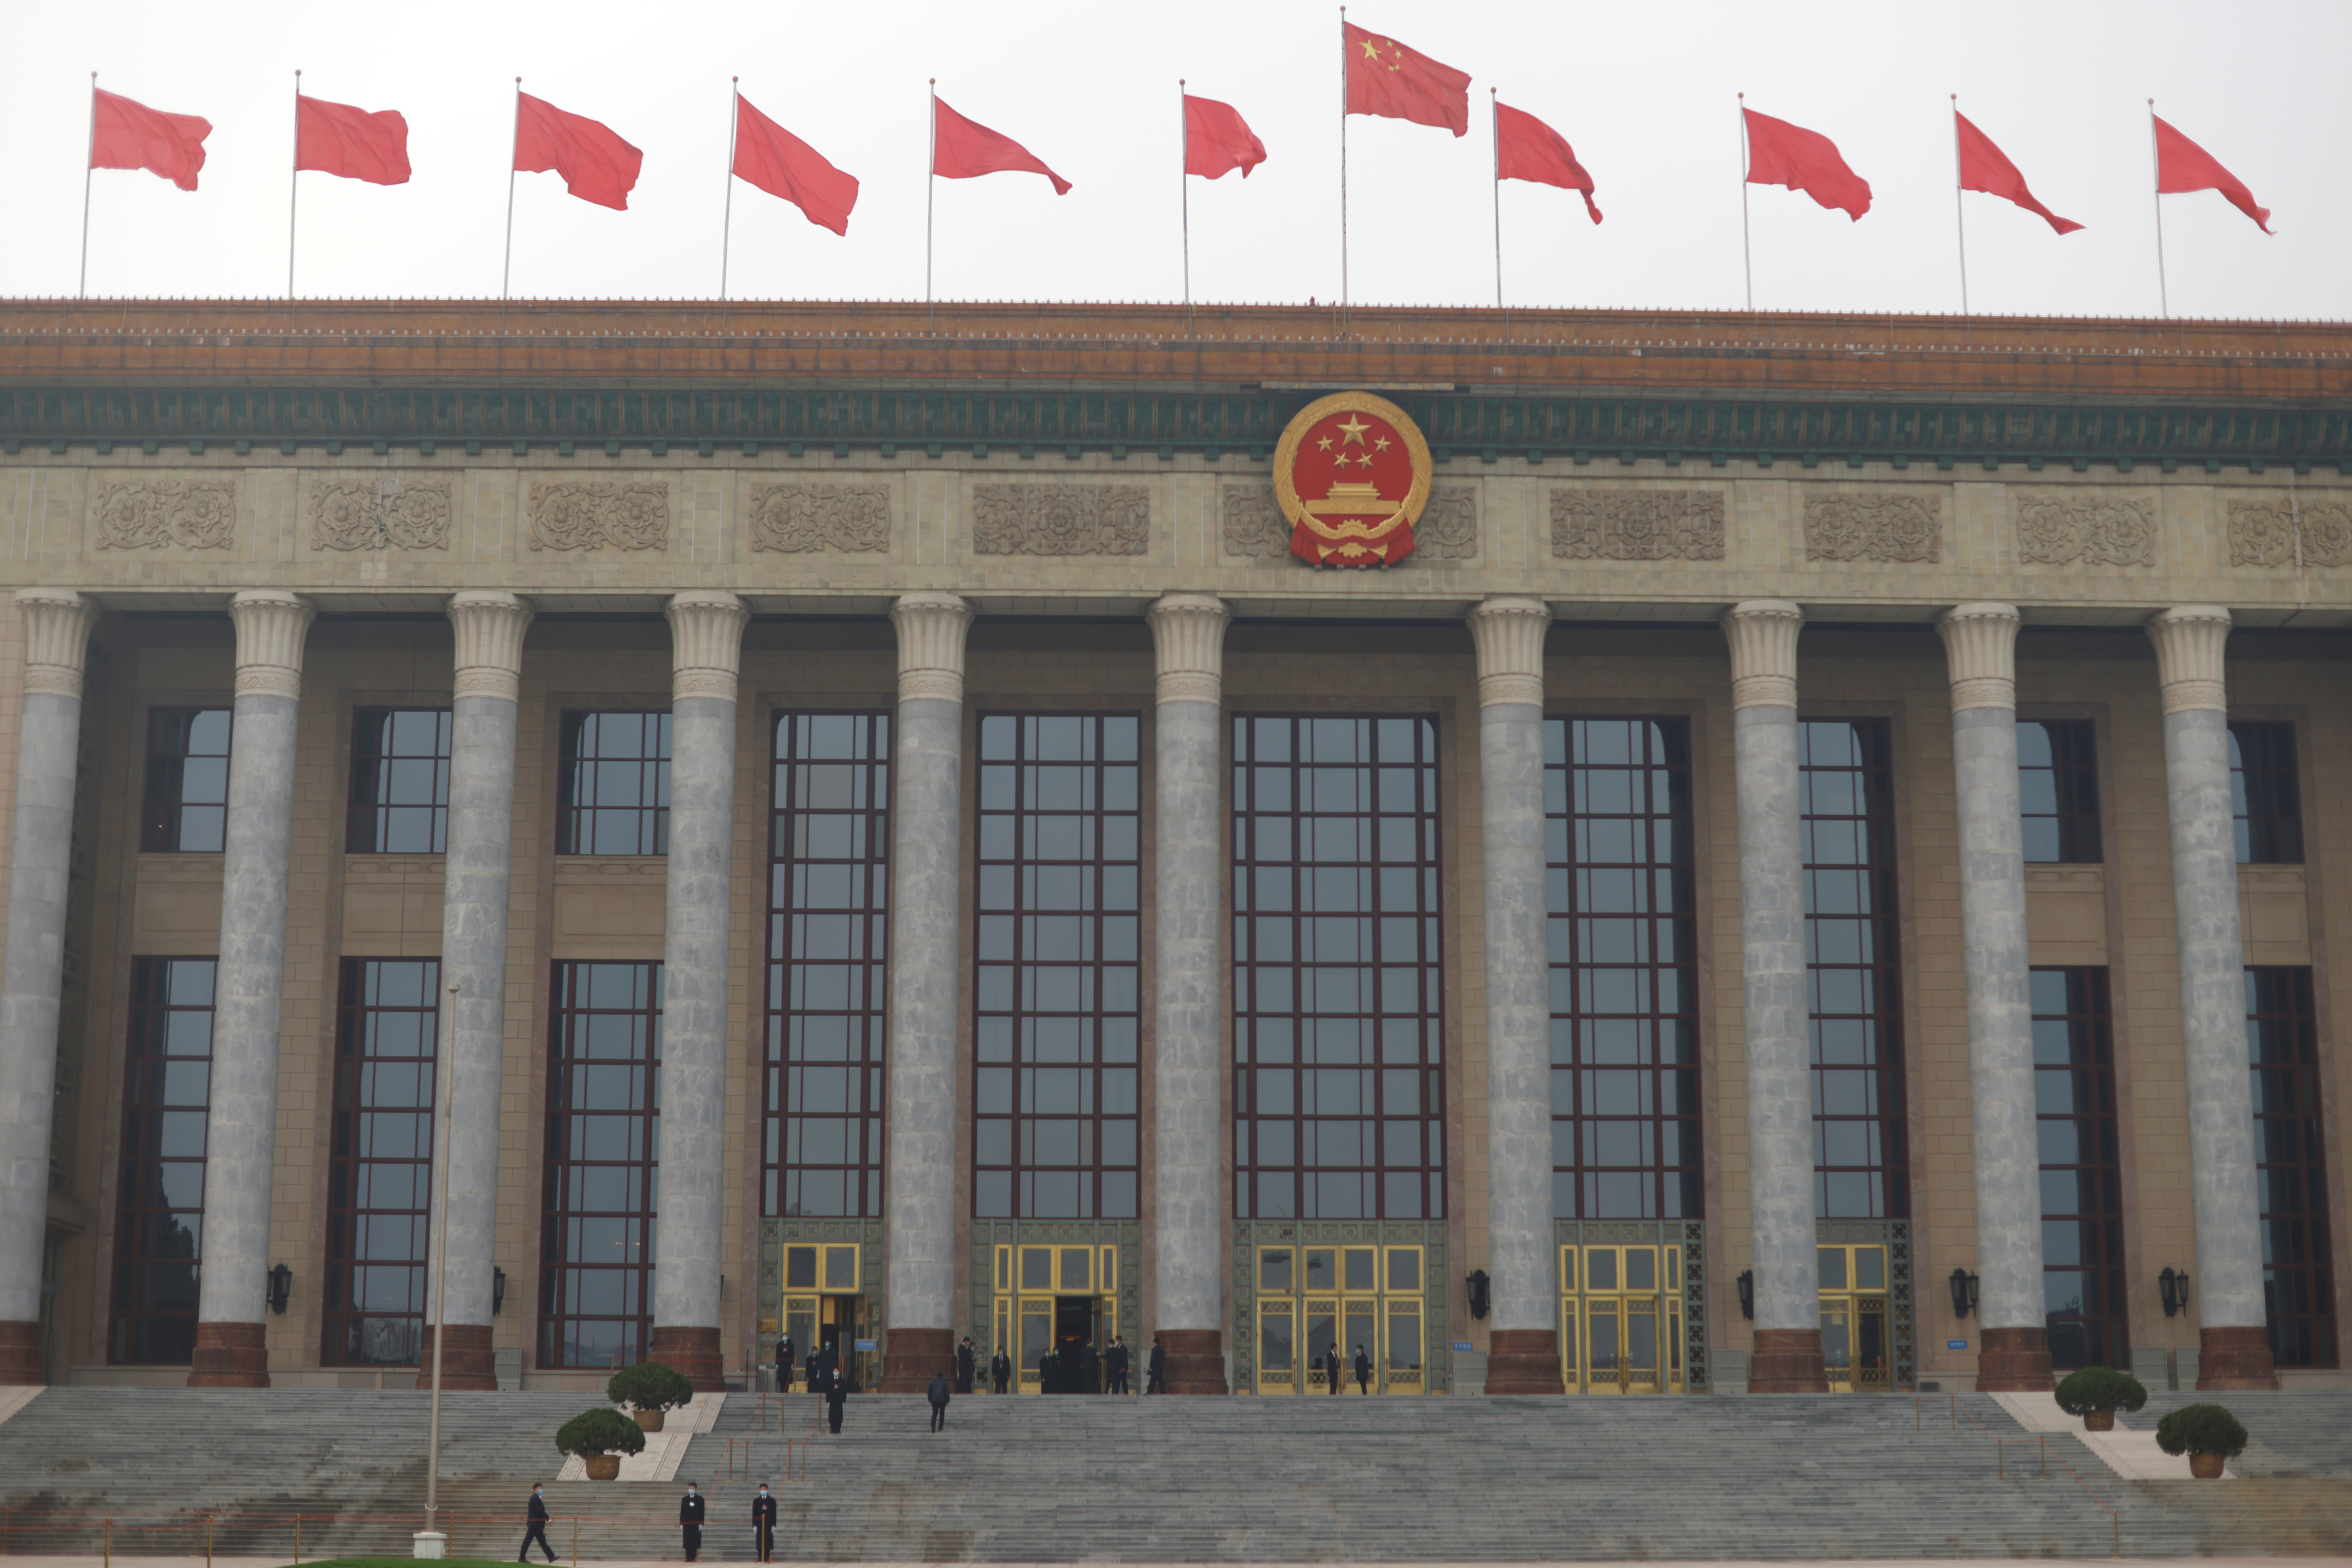 Closing session of the Chinese People's Political Consultative Conference (CPPCC) in Beijing